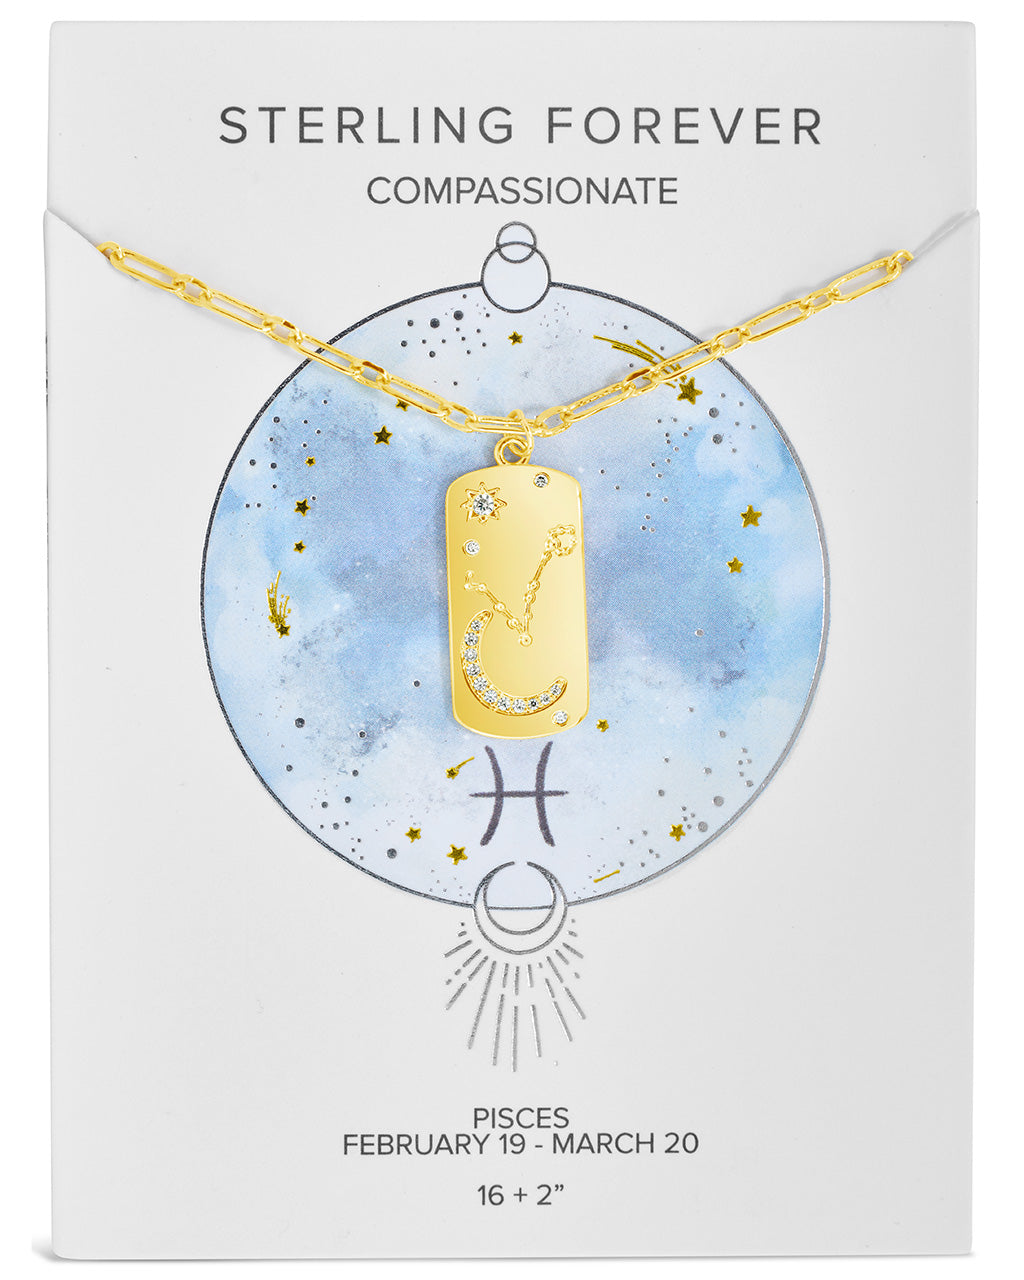 Constellation Dog Tag Necklace Necklace Sterling Forever Gold Pisces (Feb 19 - Mar 20) 